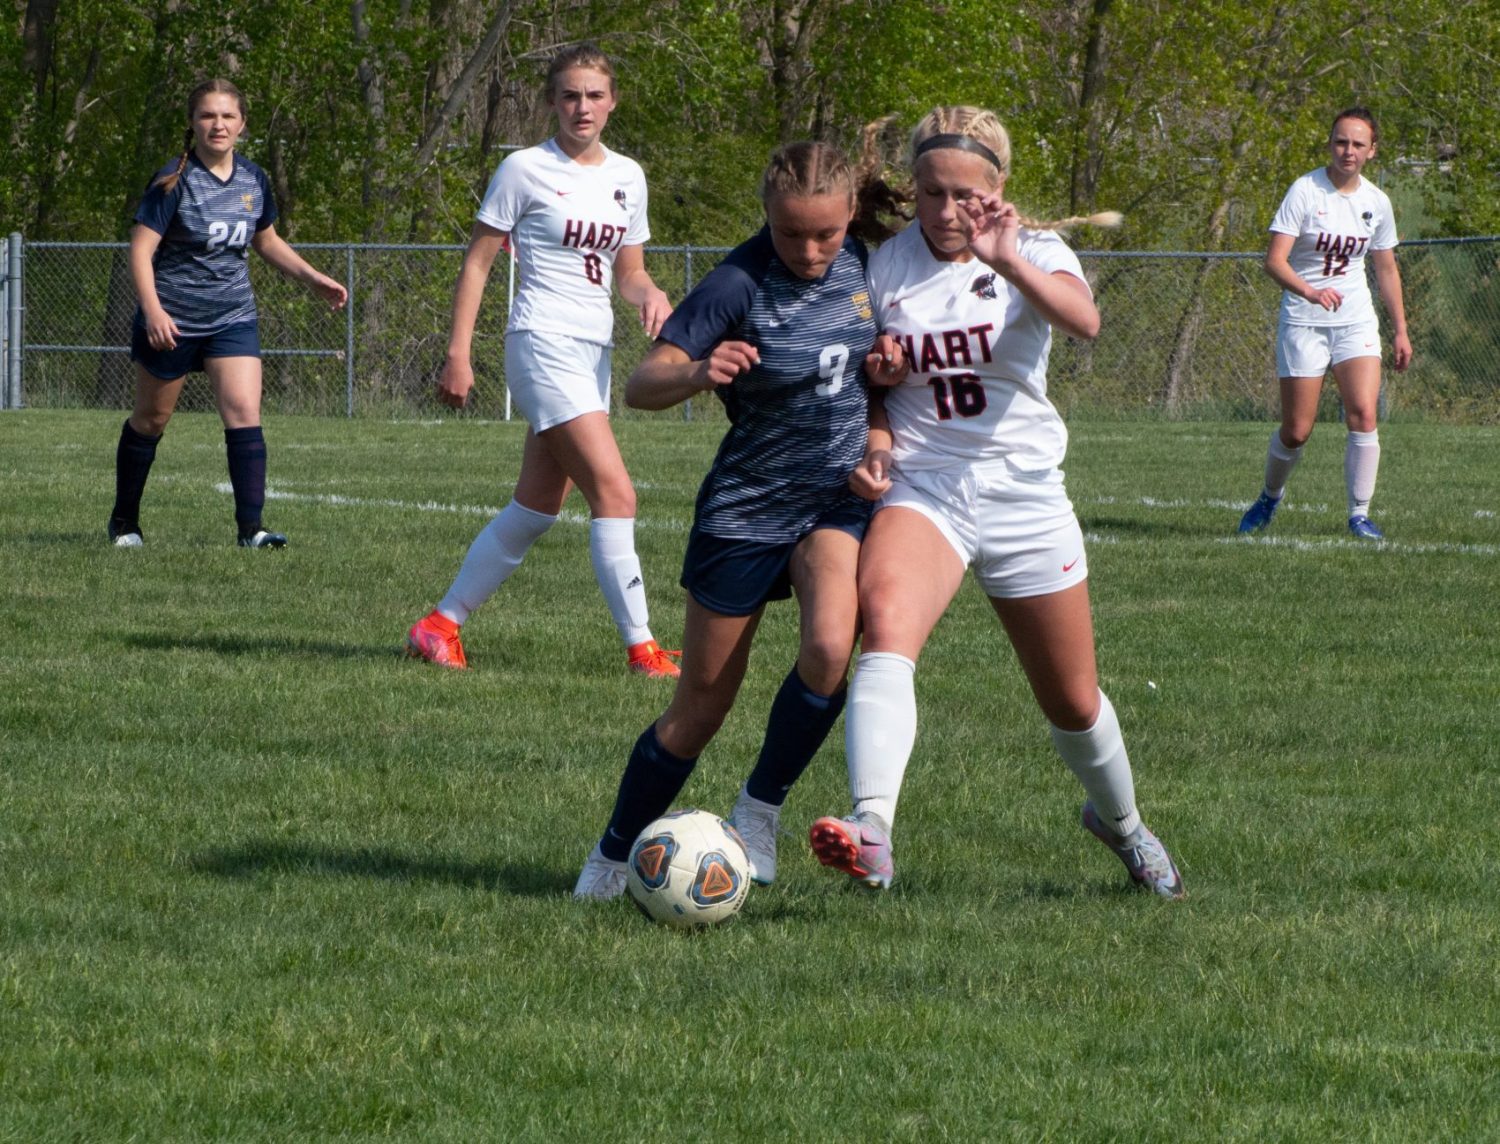 Manistee advances in Division 3 soccer district with shutout of Hart